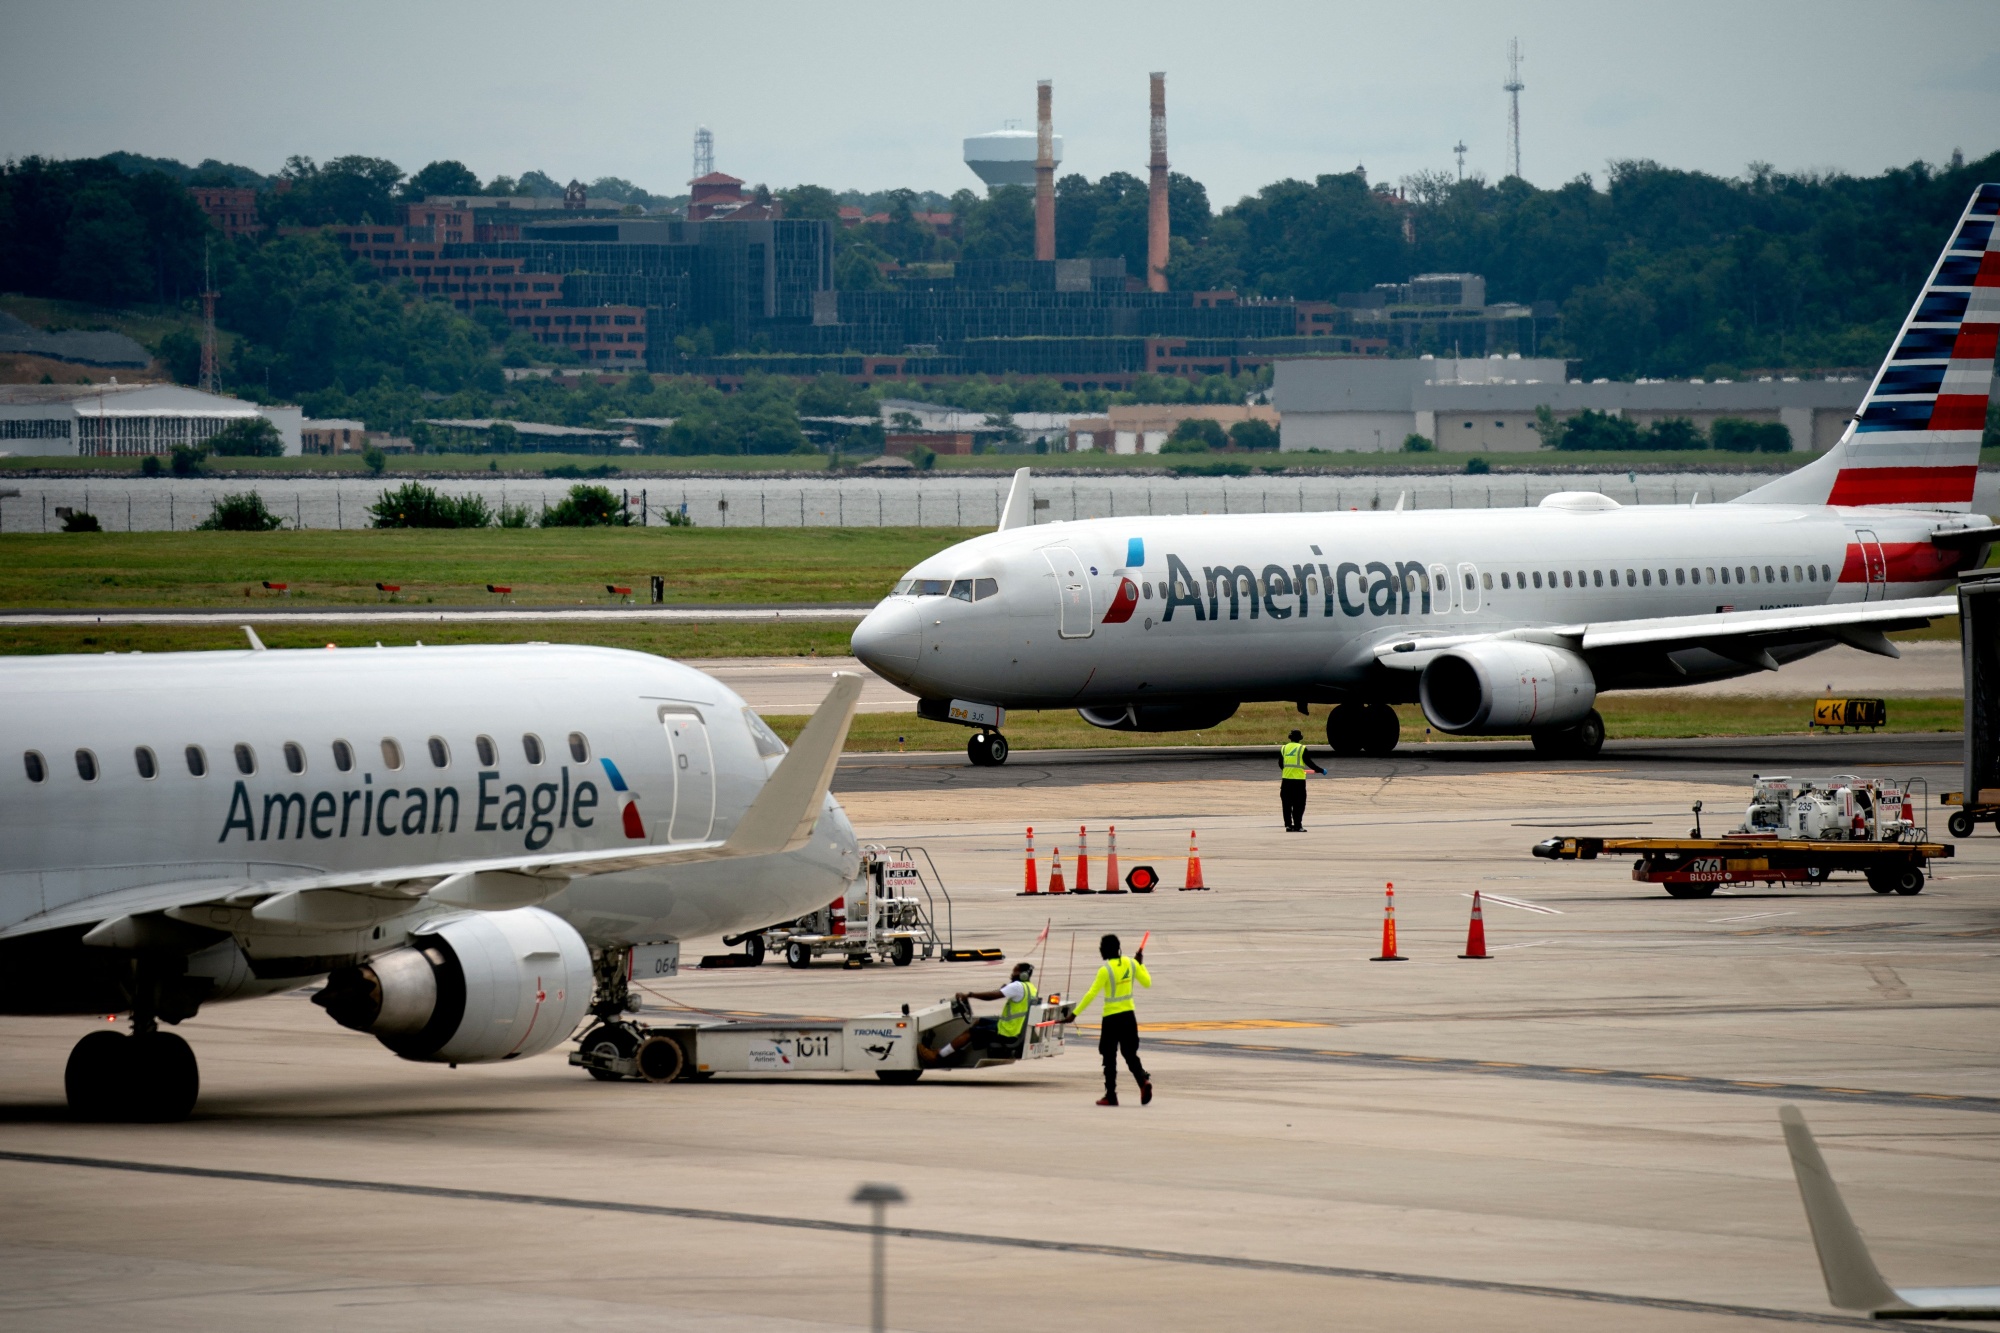 American and JetBlue said they created the agreement to compete more effectively in the New York City and Boston areas.